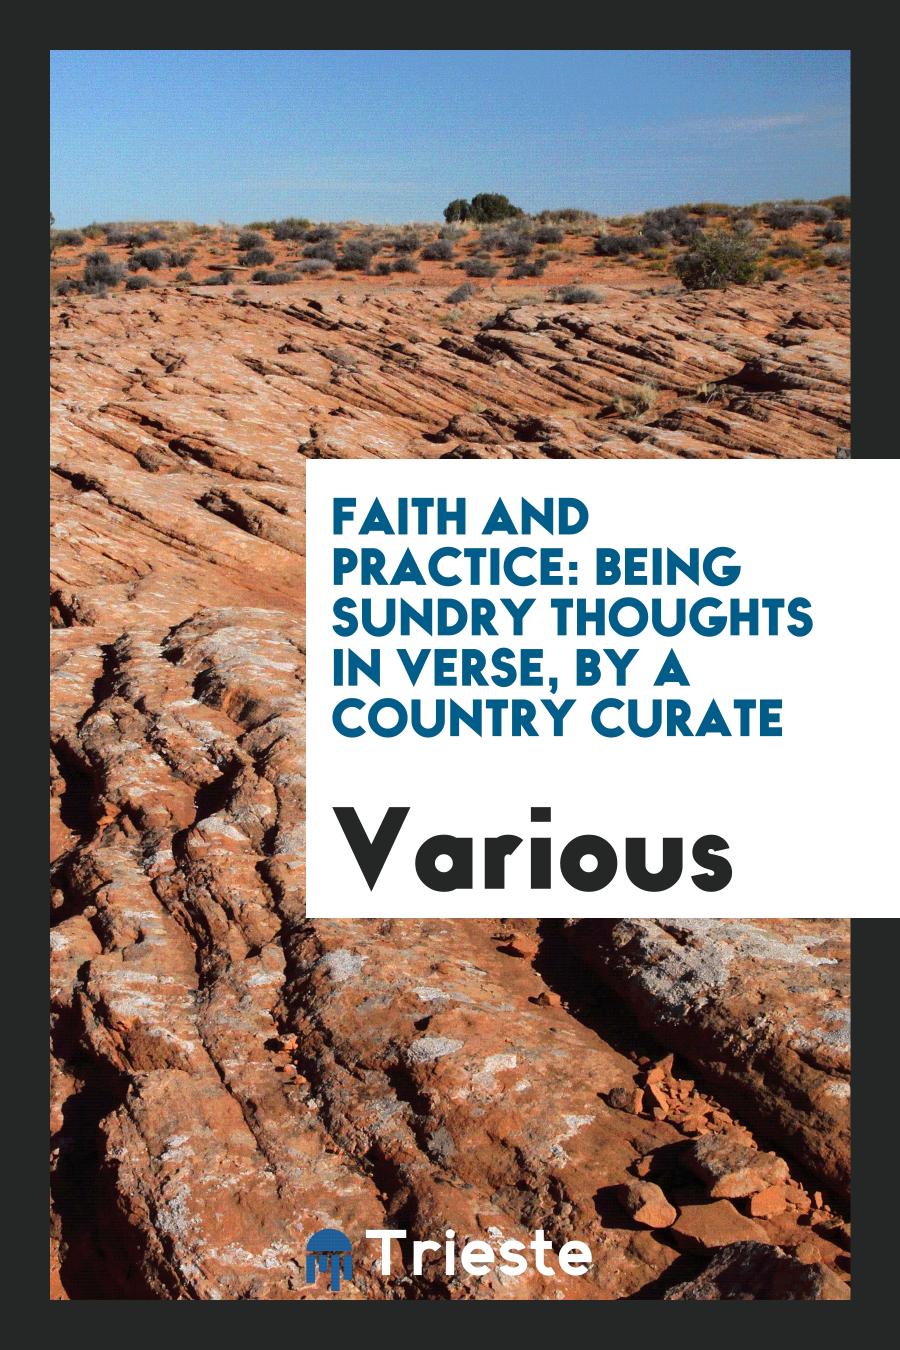 Faith and Practice: Being Sundry Thoughts in Verse, by a Country Curate